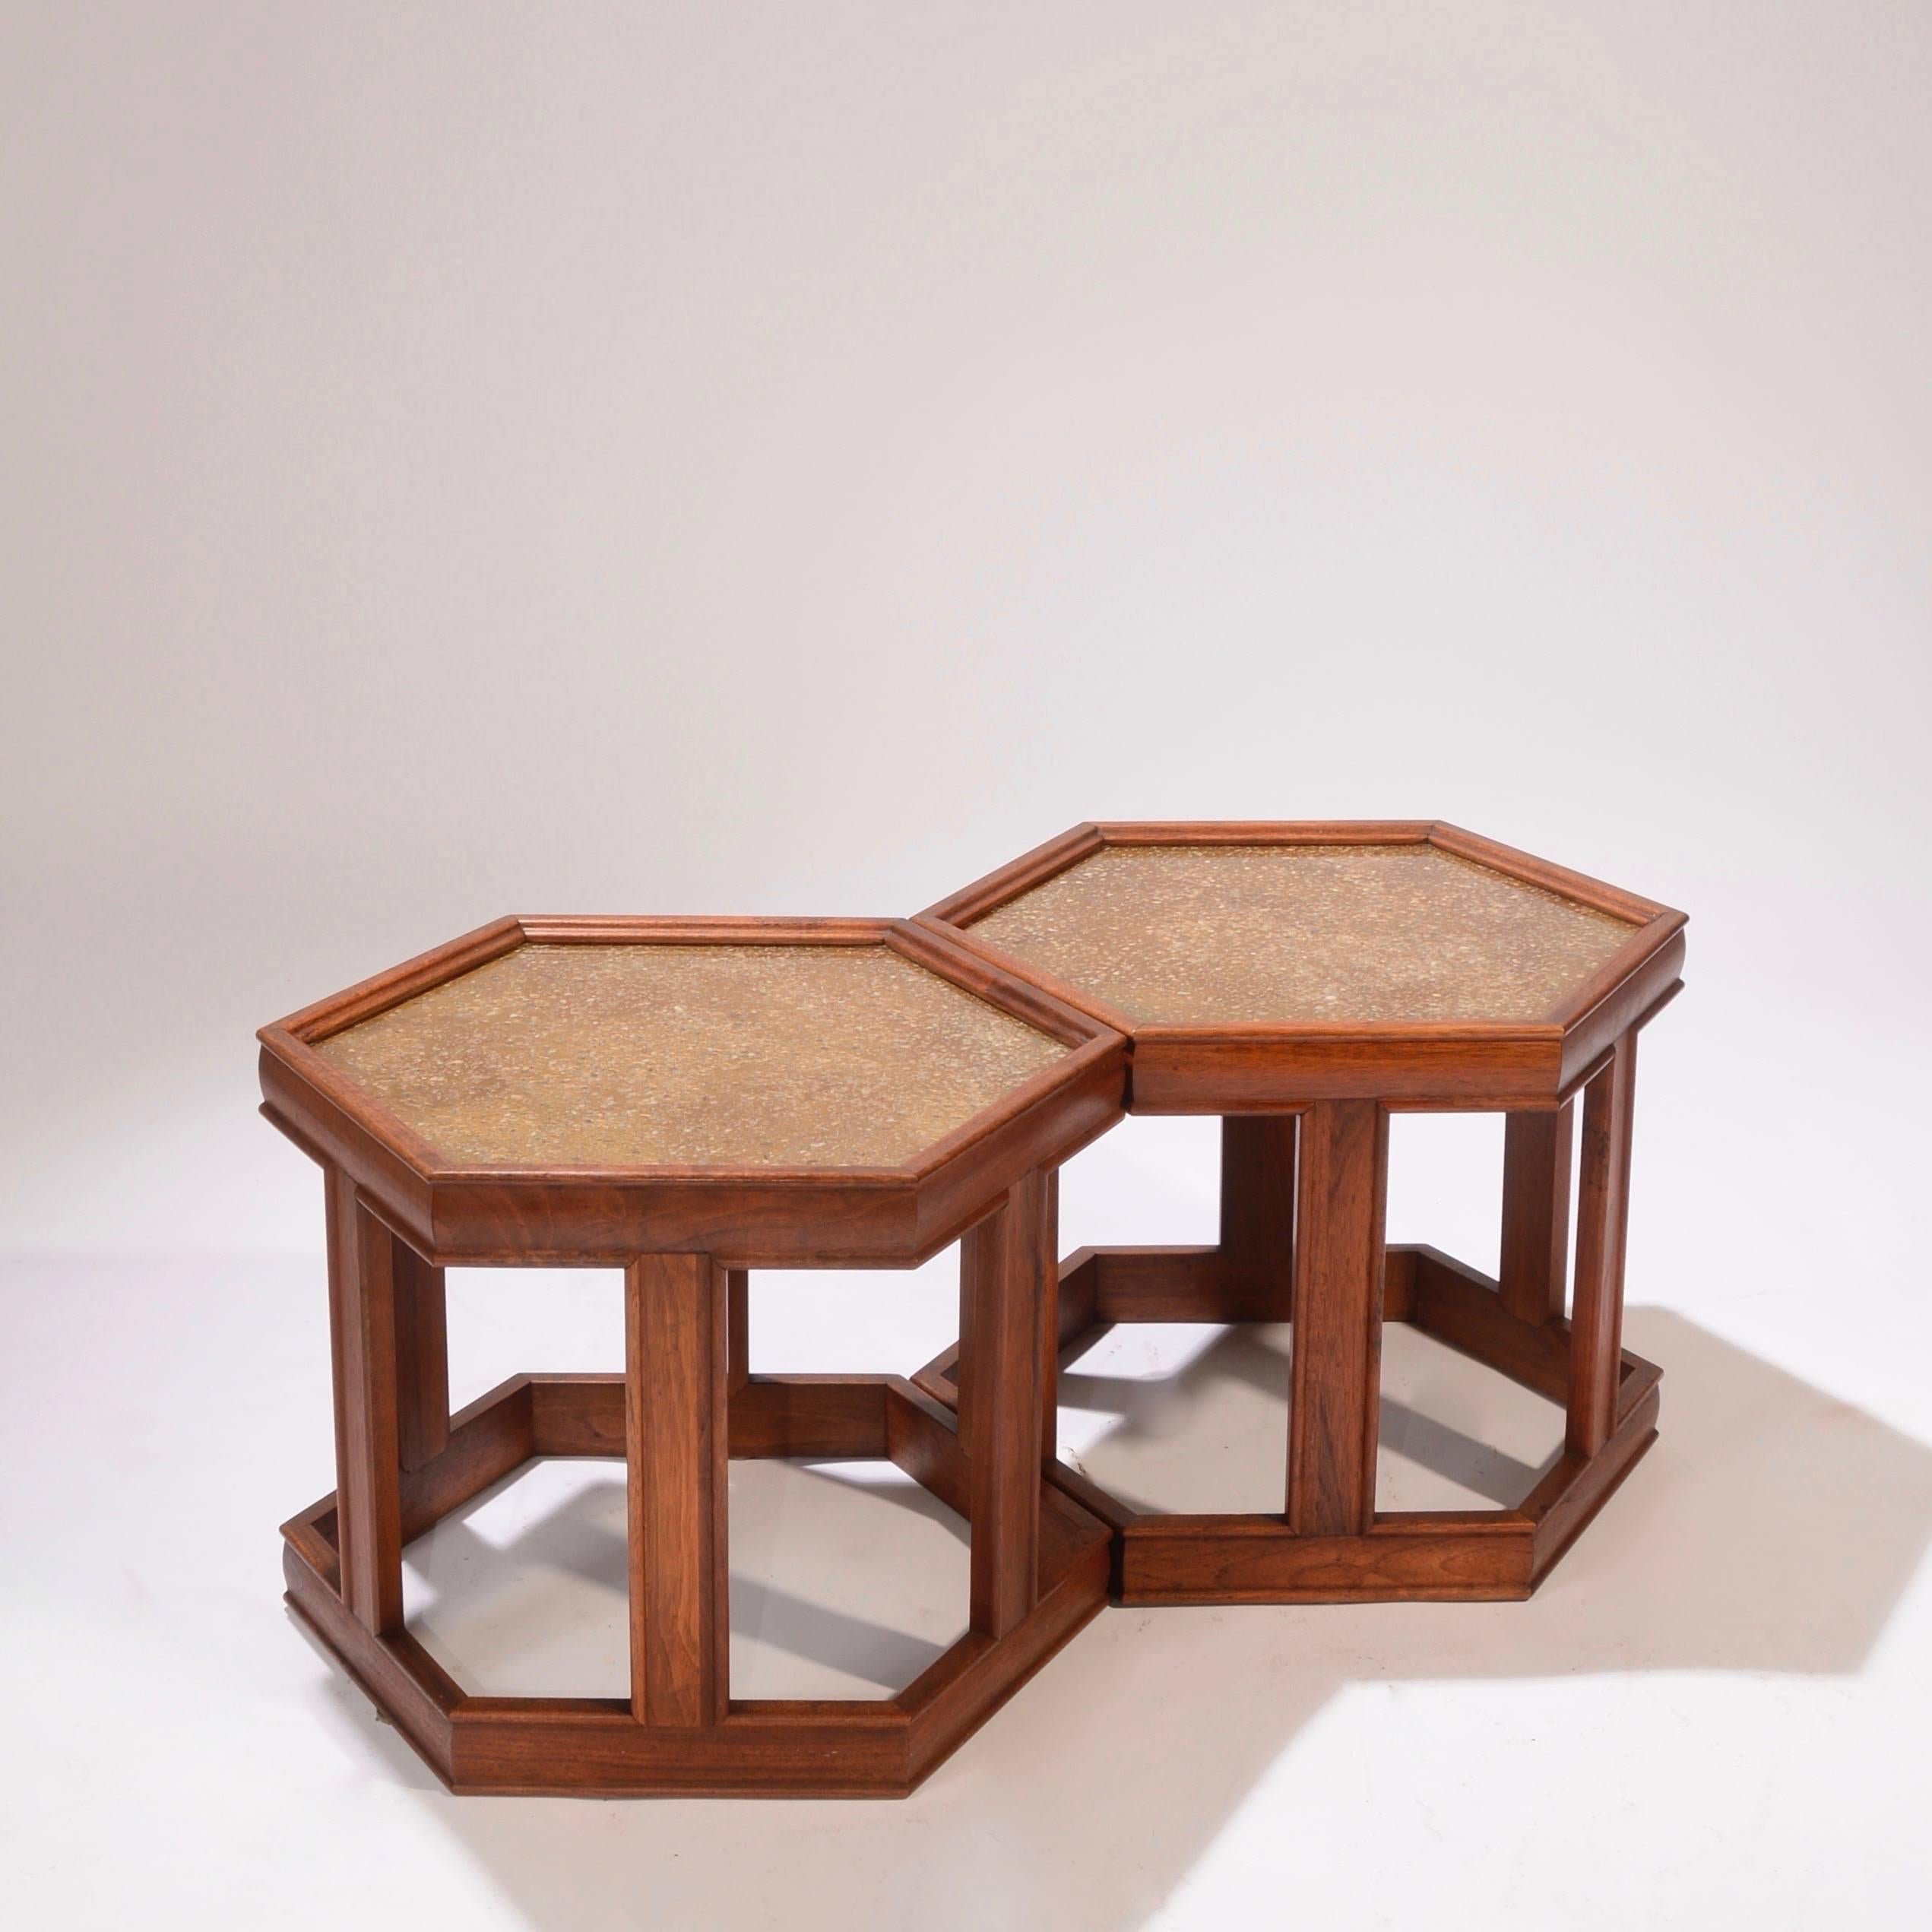 Set of three hexagonal John Keal for Brown Saltman tables. Frames are walnut with enameled textured design under glass tops. We now have three! They look fantastic in odd numbers. Price is per table. 